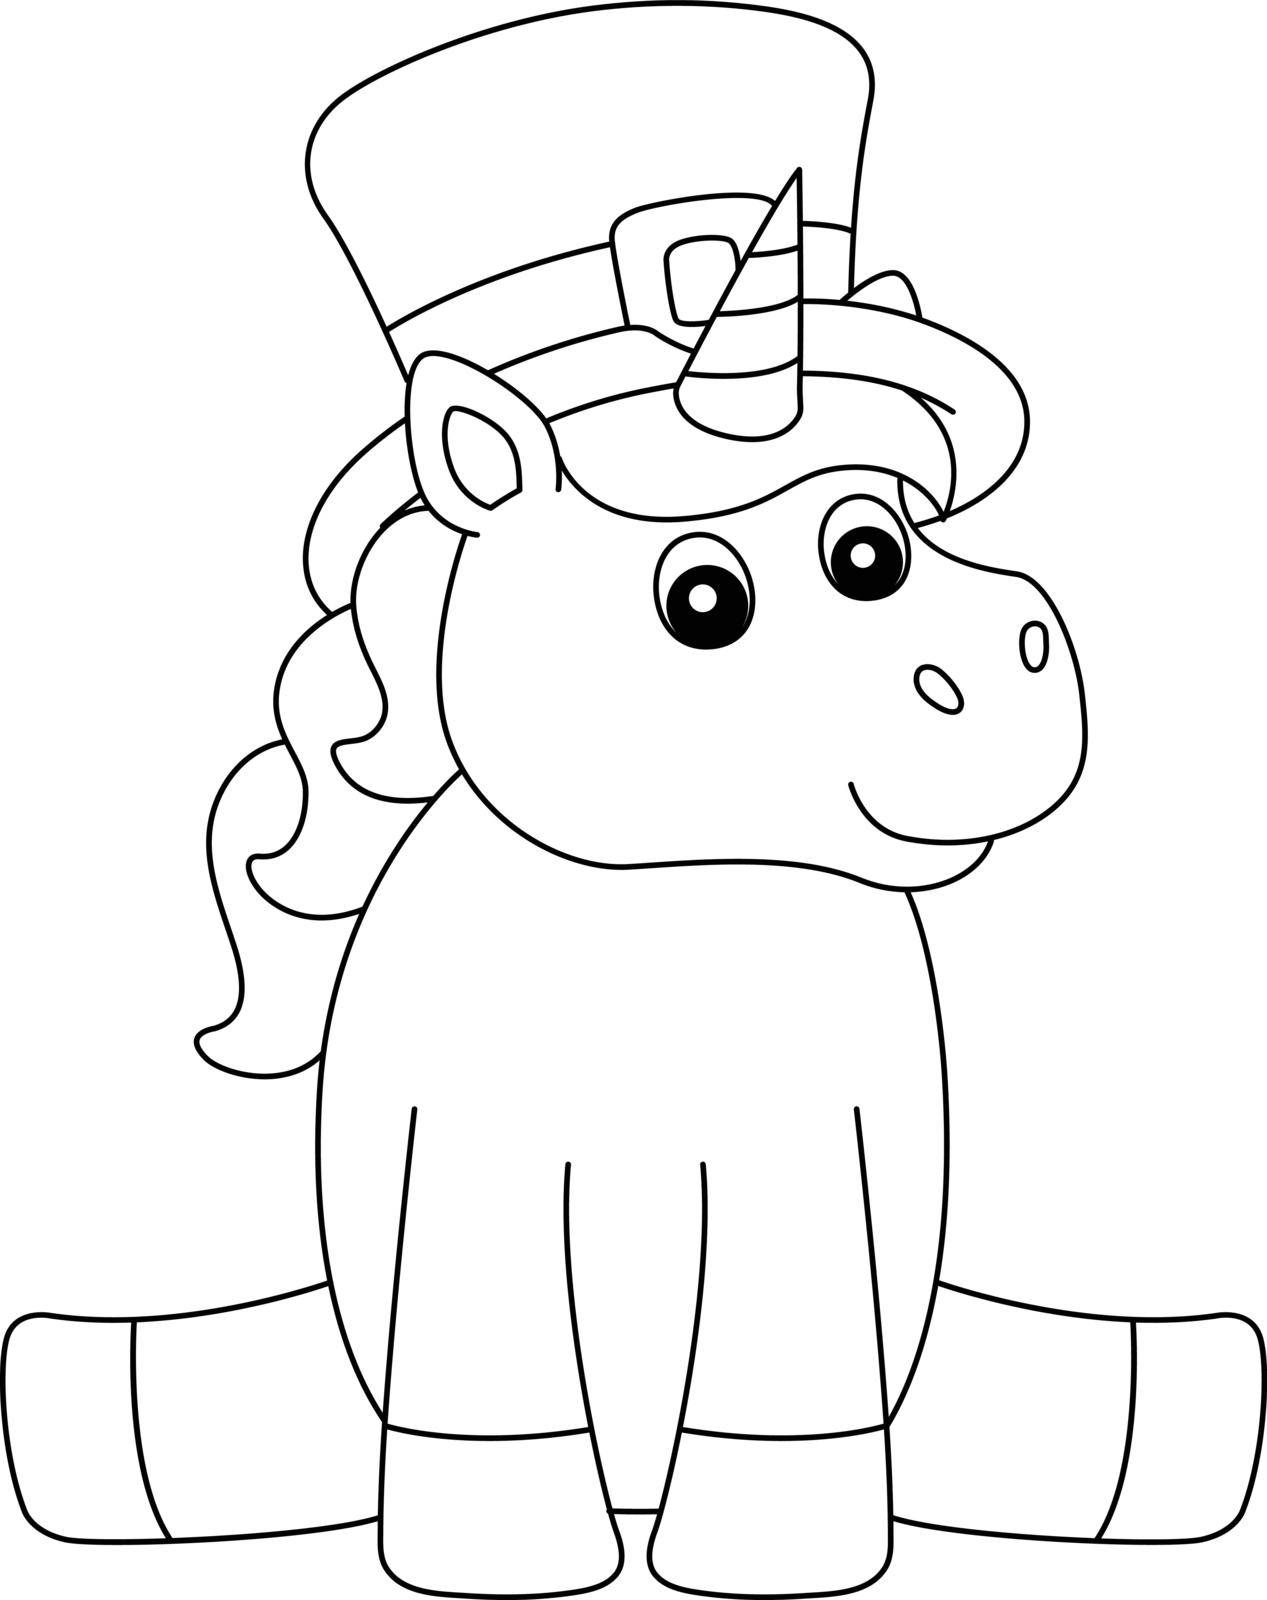 A cute and funny coloring page of an st. Patrick day unicorn. Provides hours of coloring fun for children. To color, this page is very easy. Suitable for little kids and toddlers.